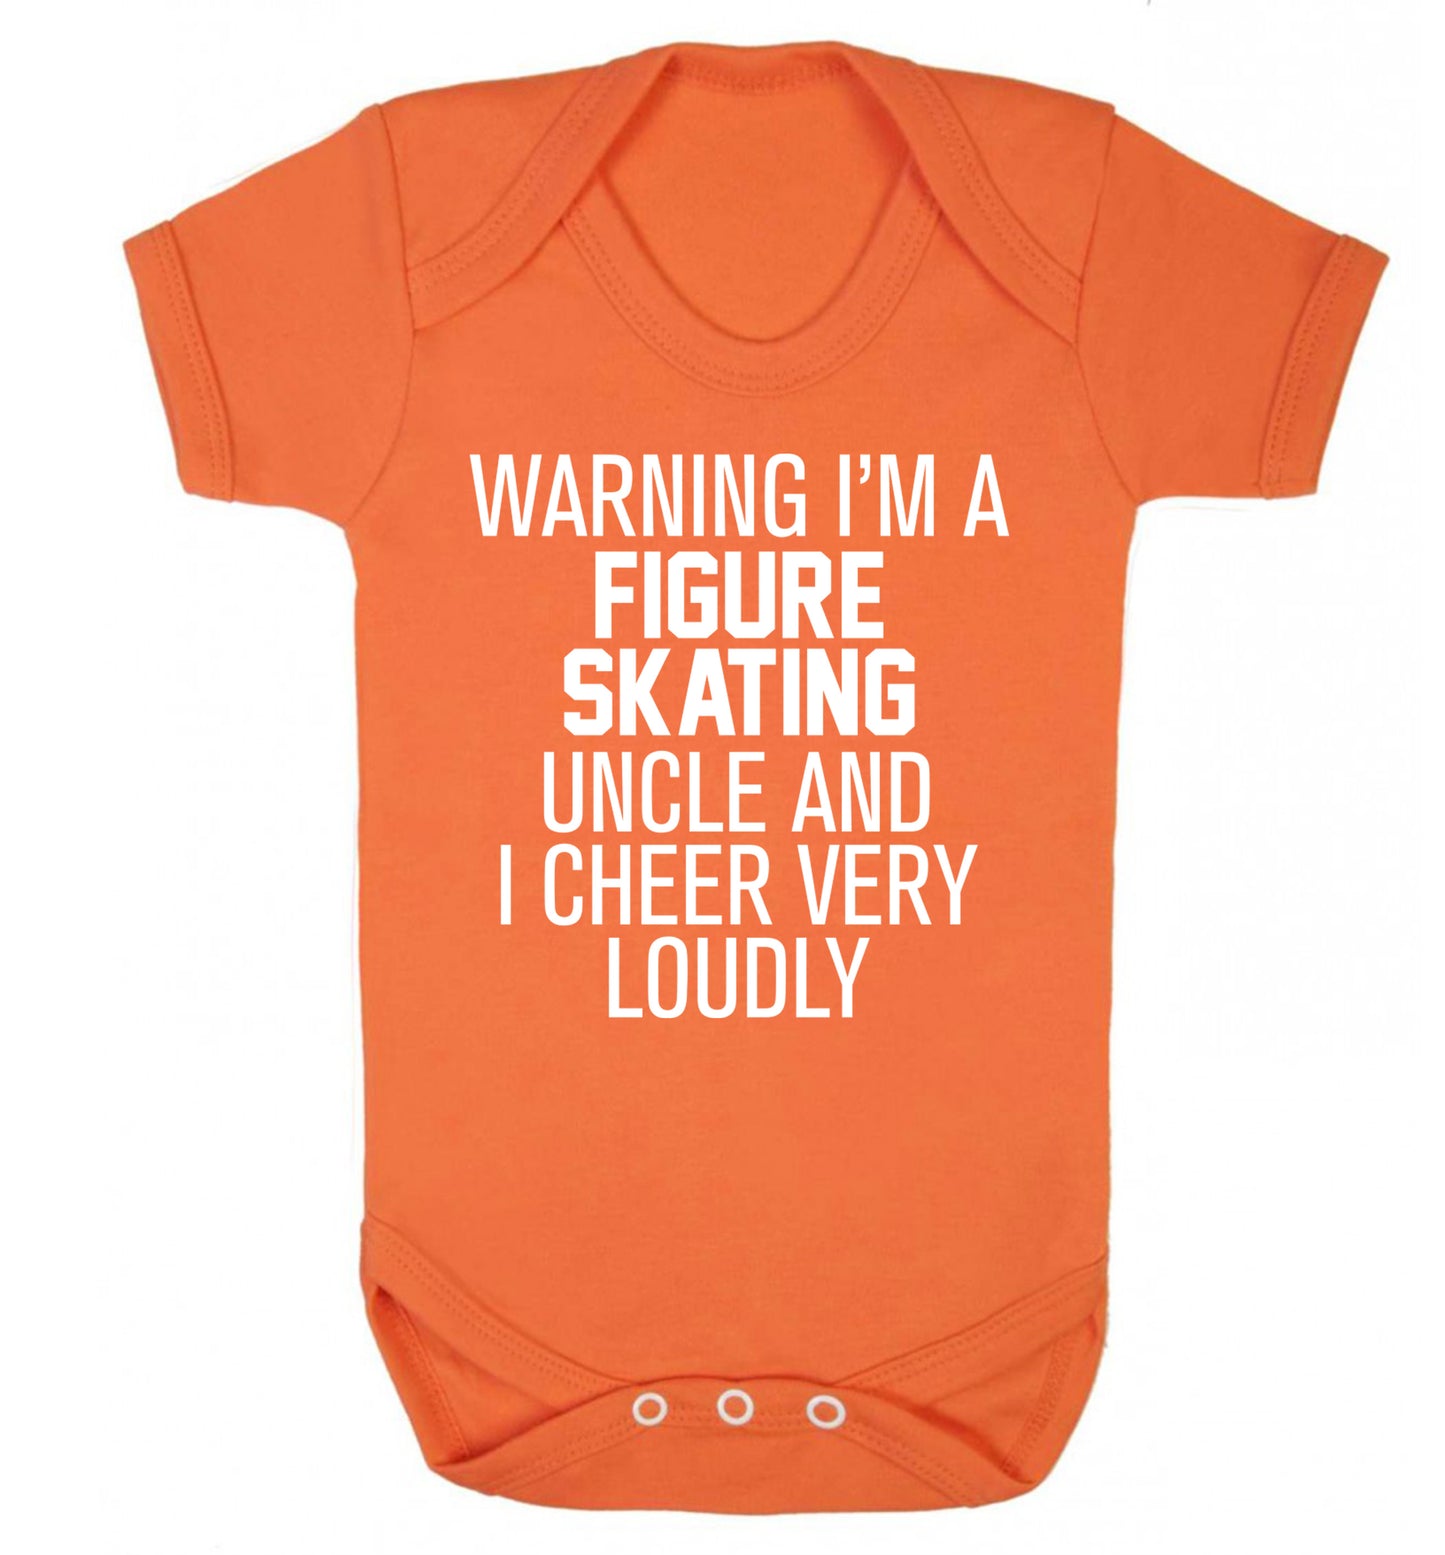 Warning I'm a figure skating uncle and I cheer very loudly Baby Vest orange 18-24 months